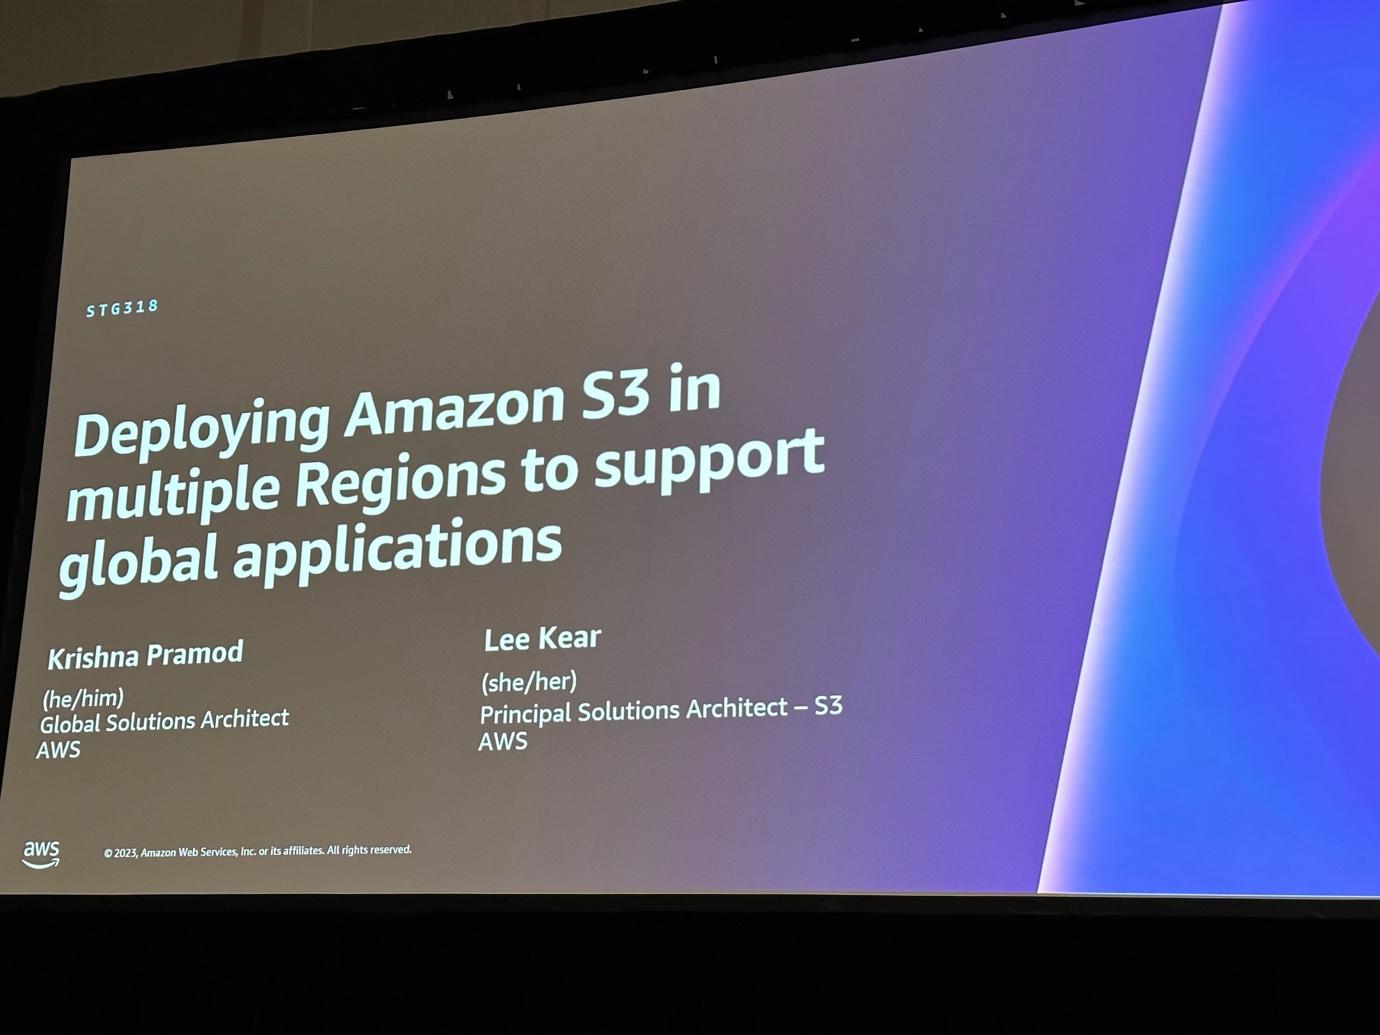 Deploying Amazon S3 in multiple Regions to support global applications